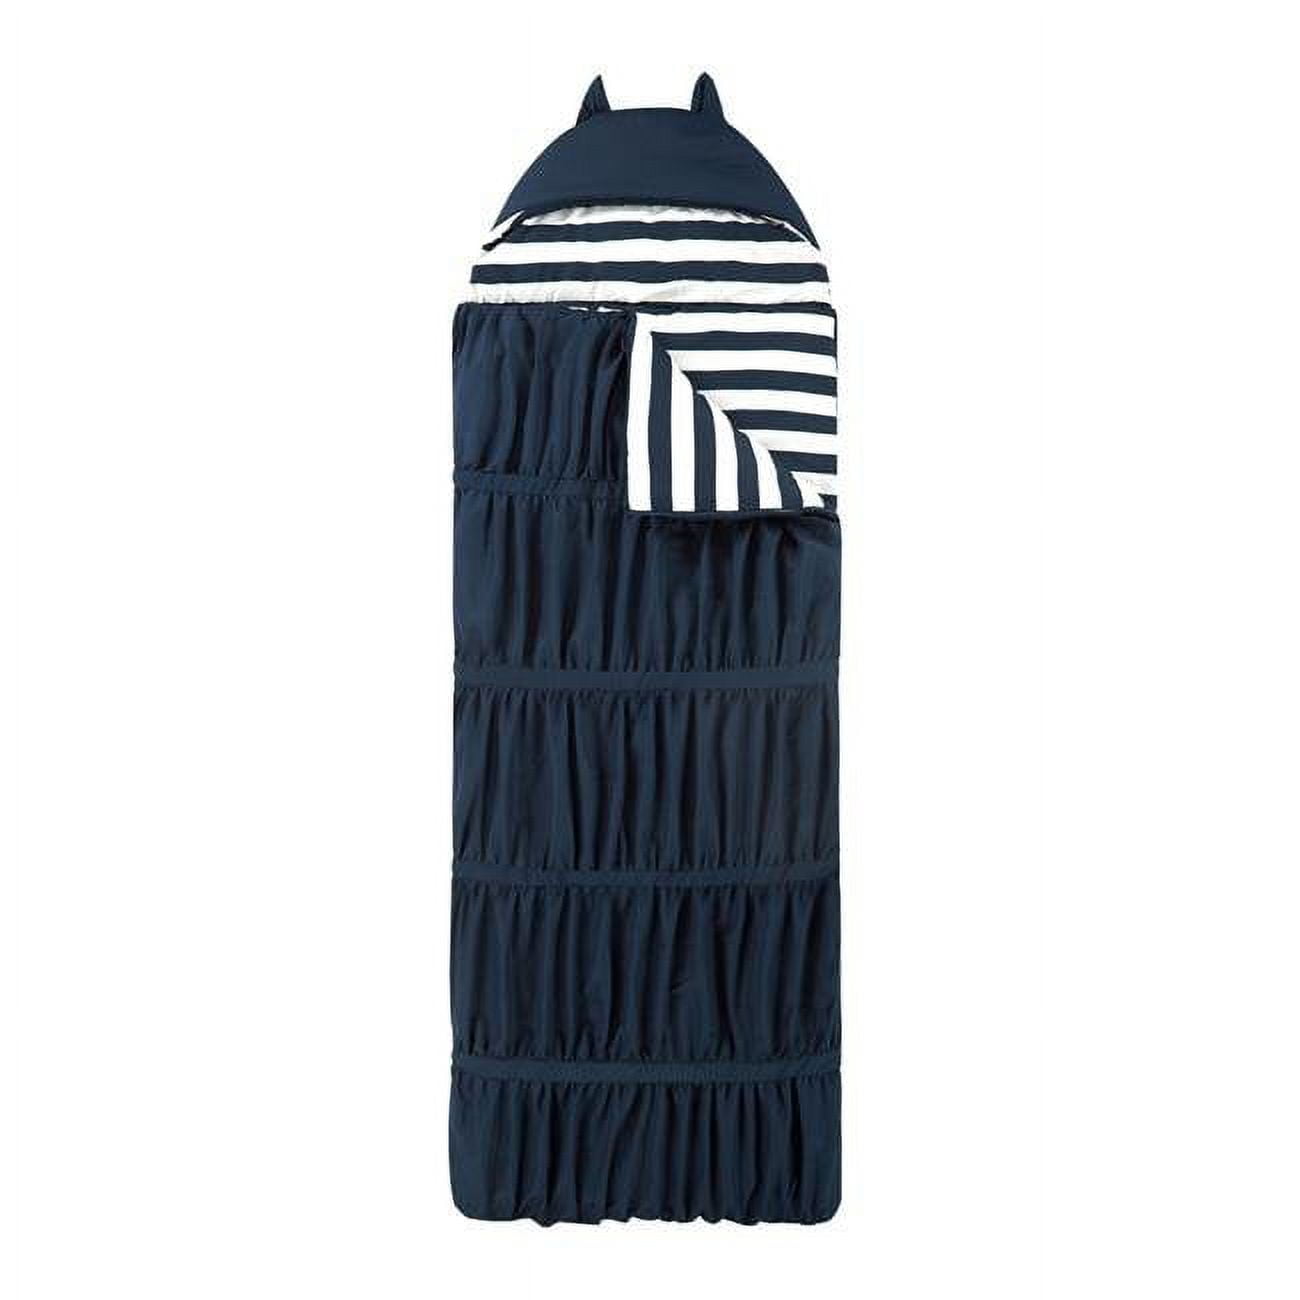 Picture of Chic Home BBG17956-US Reina Sleeping Bag with Cat Ear Hood Ruched Ruffled Design with Striped Interior for Kids&#44; Teens & Young Adults Zipper Closure&#44; 32 x 75 in. - Navy & White